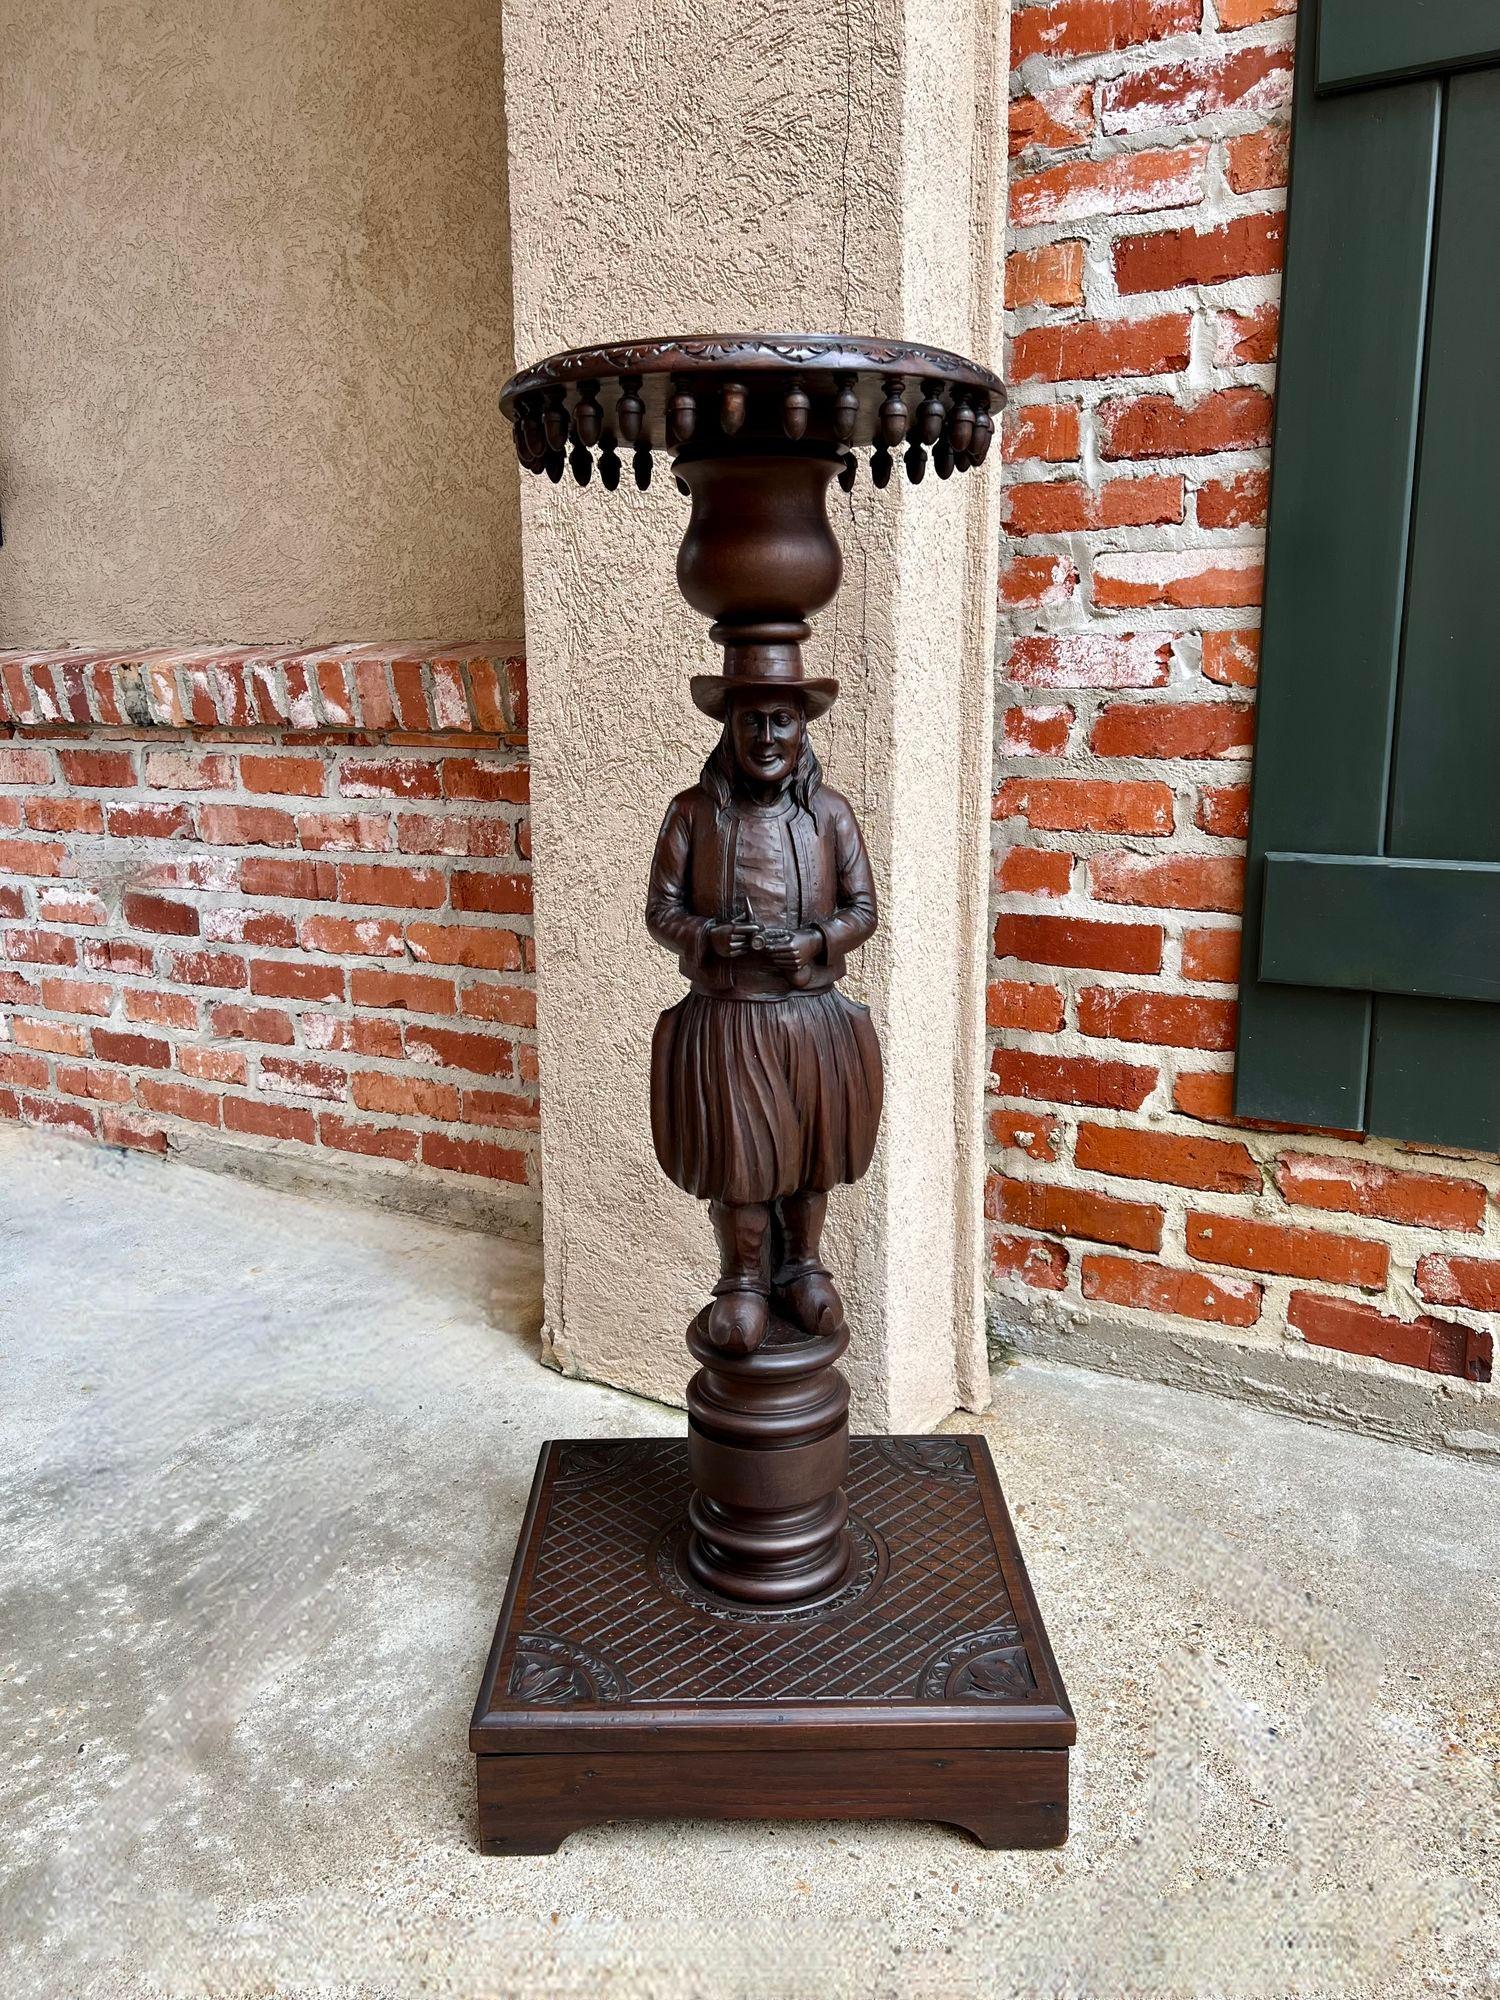 Antique French Pedestal Plant Stand Round Display Carved Brittany Baluster.

Direct from France, a tall and highly carved French pedestal/plant stand, with fabulous Brittany details!
The main feature here is the sold chestnut baluster with a full